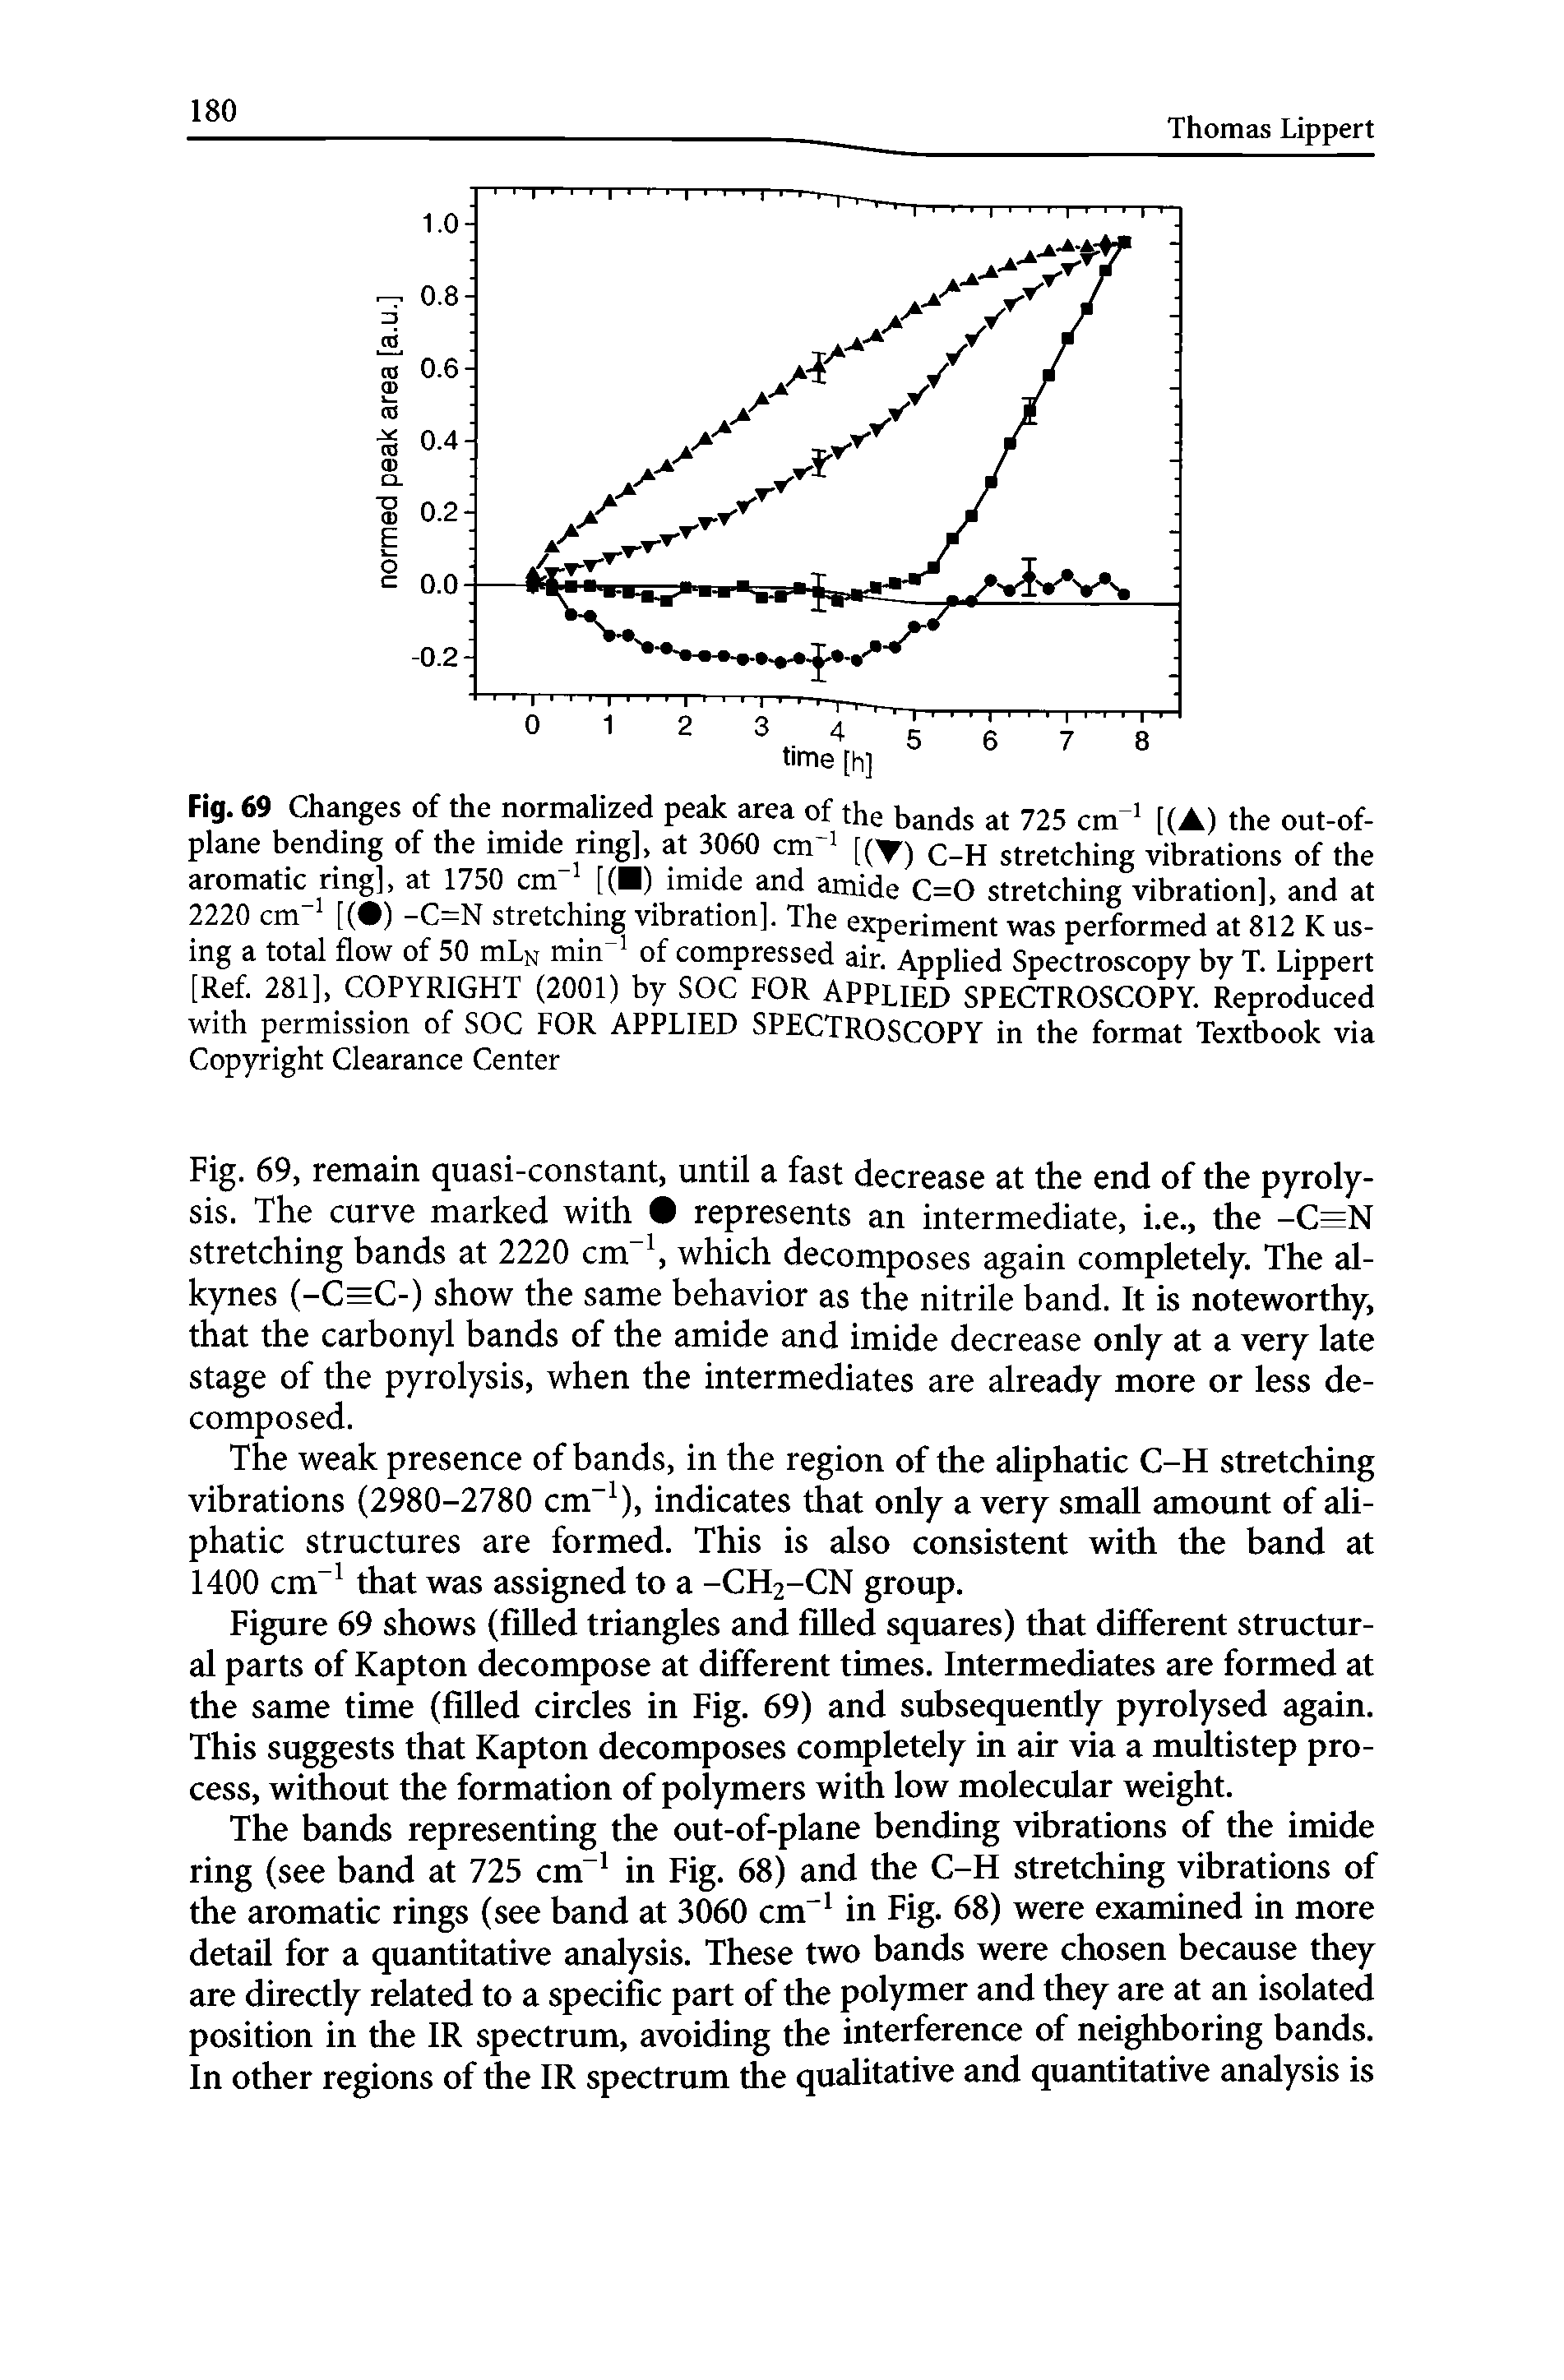 Fig. 69 Changes of the normalized peak area of the bands at 725 cm 1 [( ) the out-of-plane bending of the imide ring], at 3060 cm 1 [( ) C H stretching vibrations of the aromatic ring], at 1750 cm [( ) imide and amide C=0 stretching vibration], and at 2220 cm" [( ) -C=N stretching vibration]. The experiment was performed at 812 K us-ing a total flow of 50 mLx min of compressed air. Applied Spectroscopy by T. Lippert [Ref. 281], COPYRIGHT (2001) by SOC FOR APPLIED SPECTROSCOPY. Reproduced with permission of SOC FOR APPLIED SPECTROSCOPY in the format Textbook via Copyright Clearance Center...